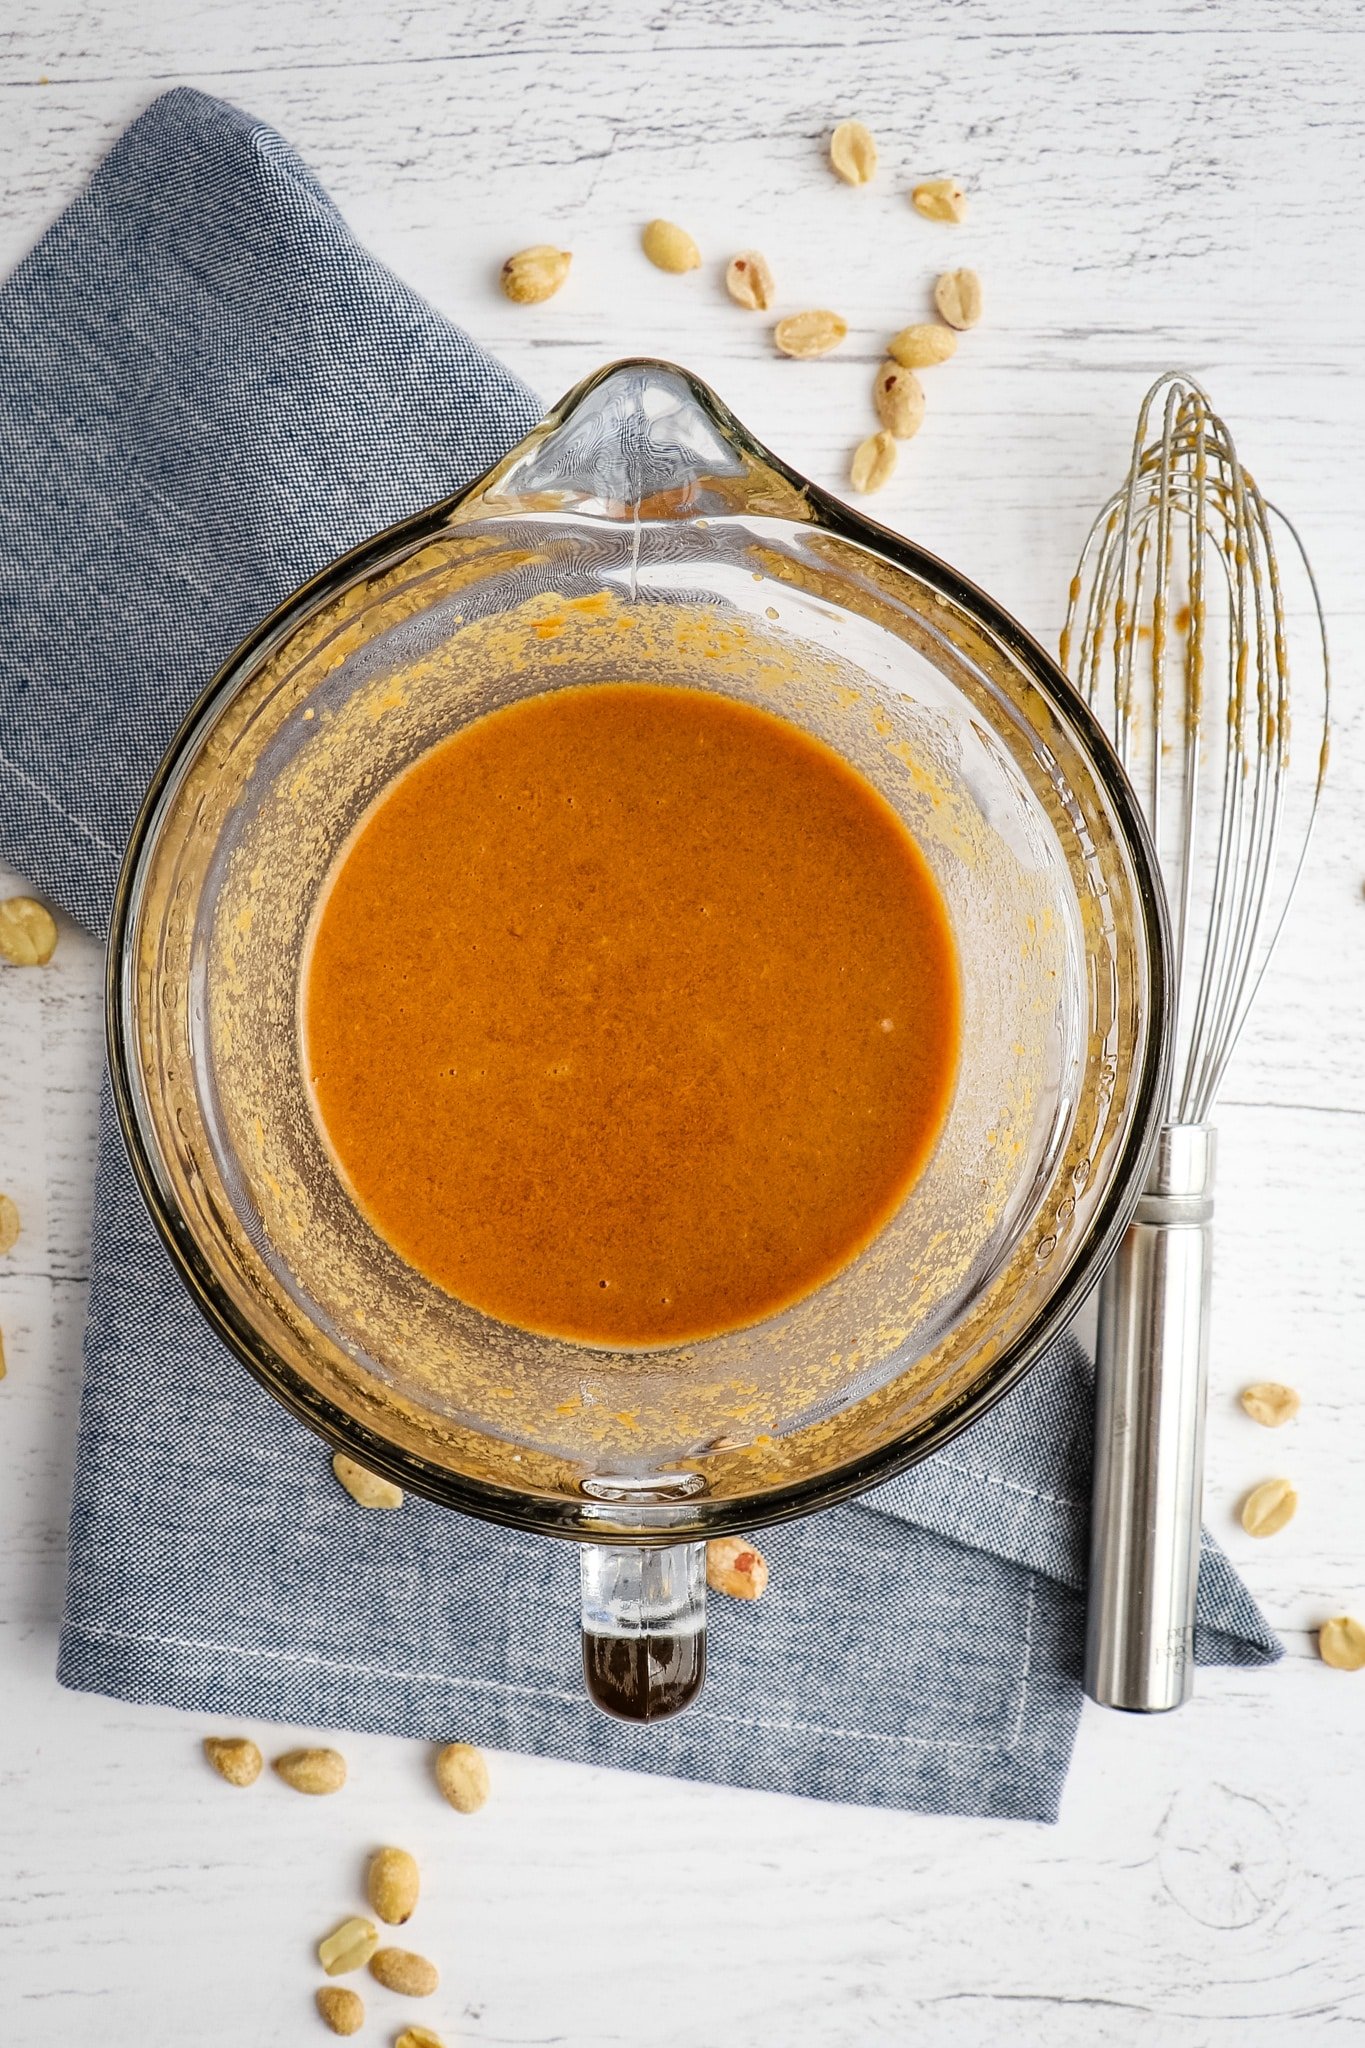 Peanut sauce in bowl with whisk on the side.